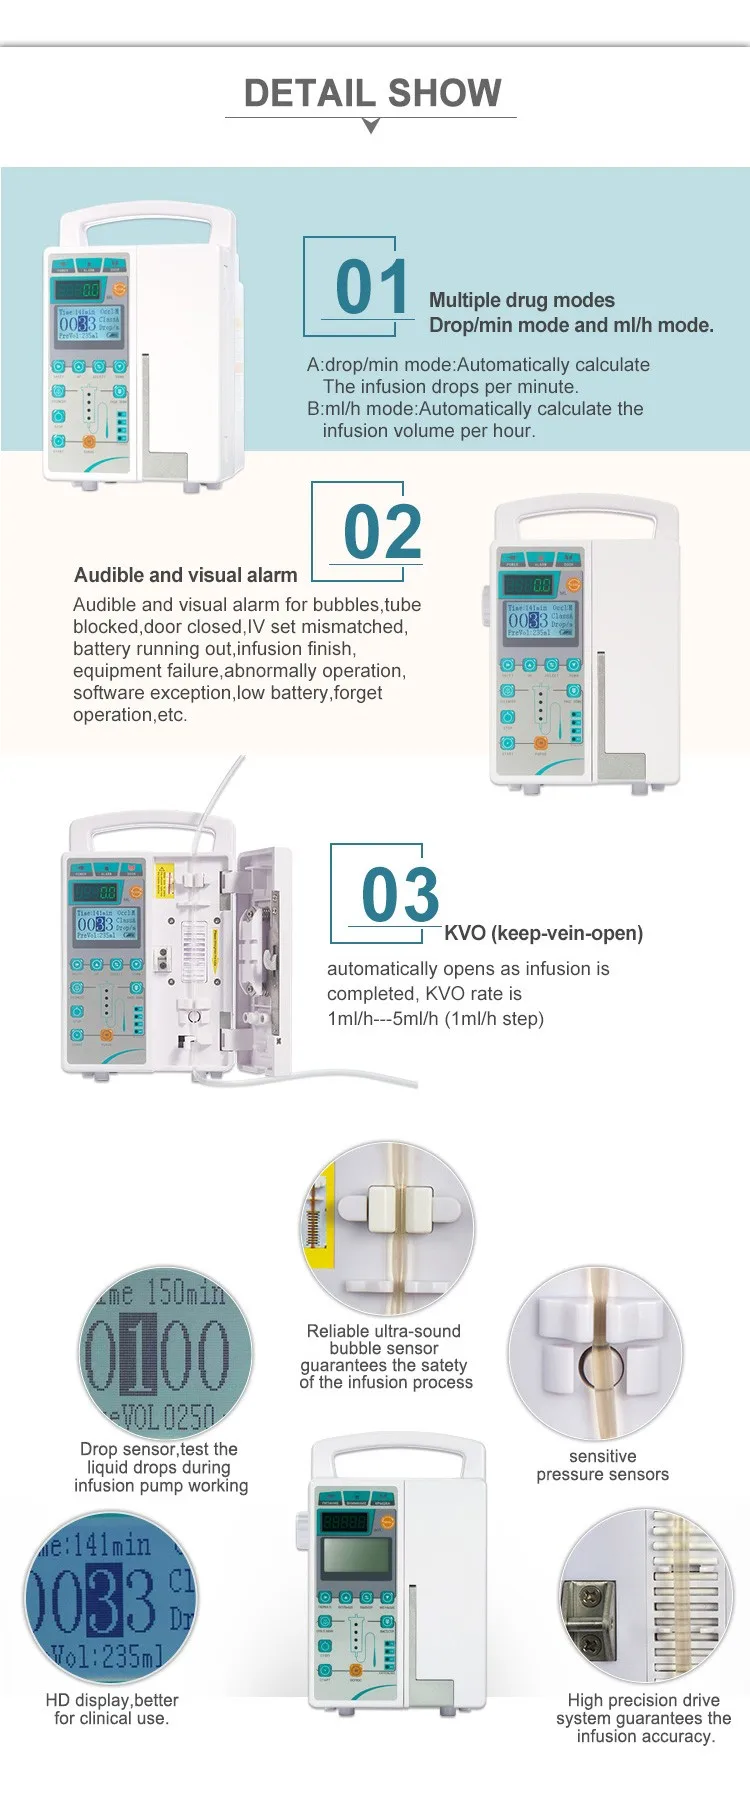 Farmasino Medical syringe Infusion Pump Equipment for hospital and clinic